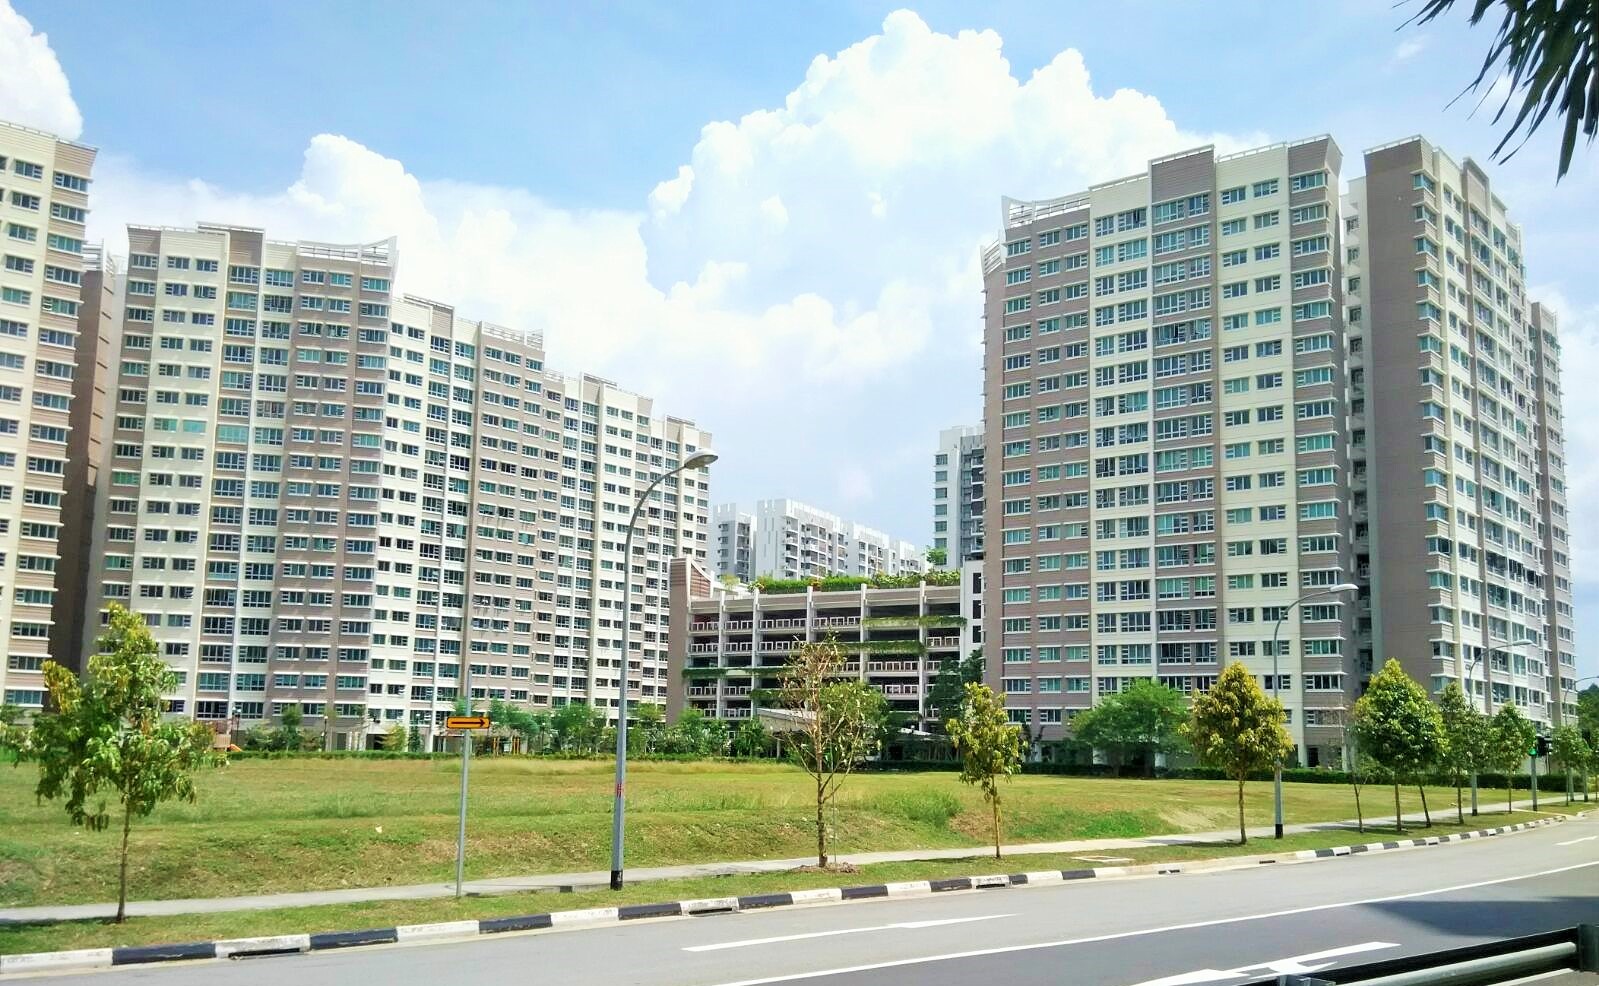 Hougang Parkedge